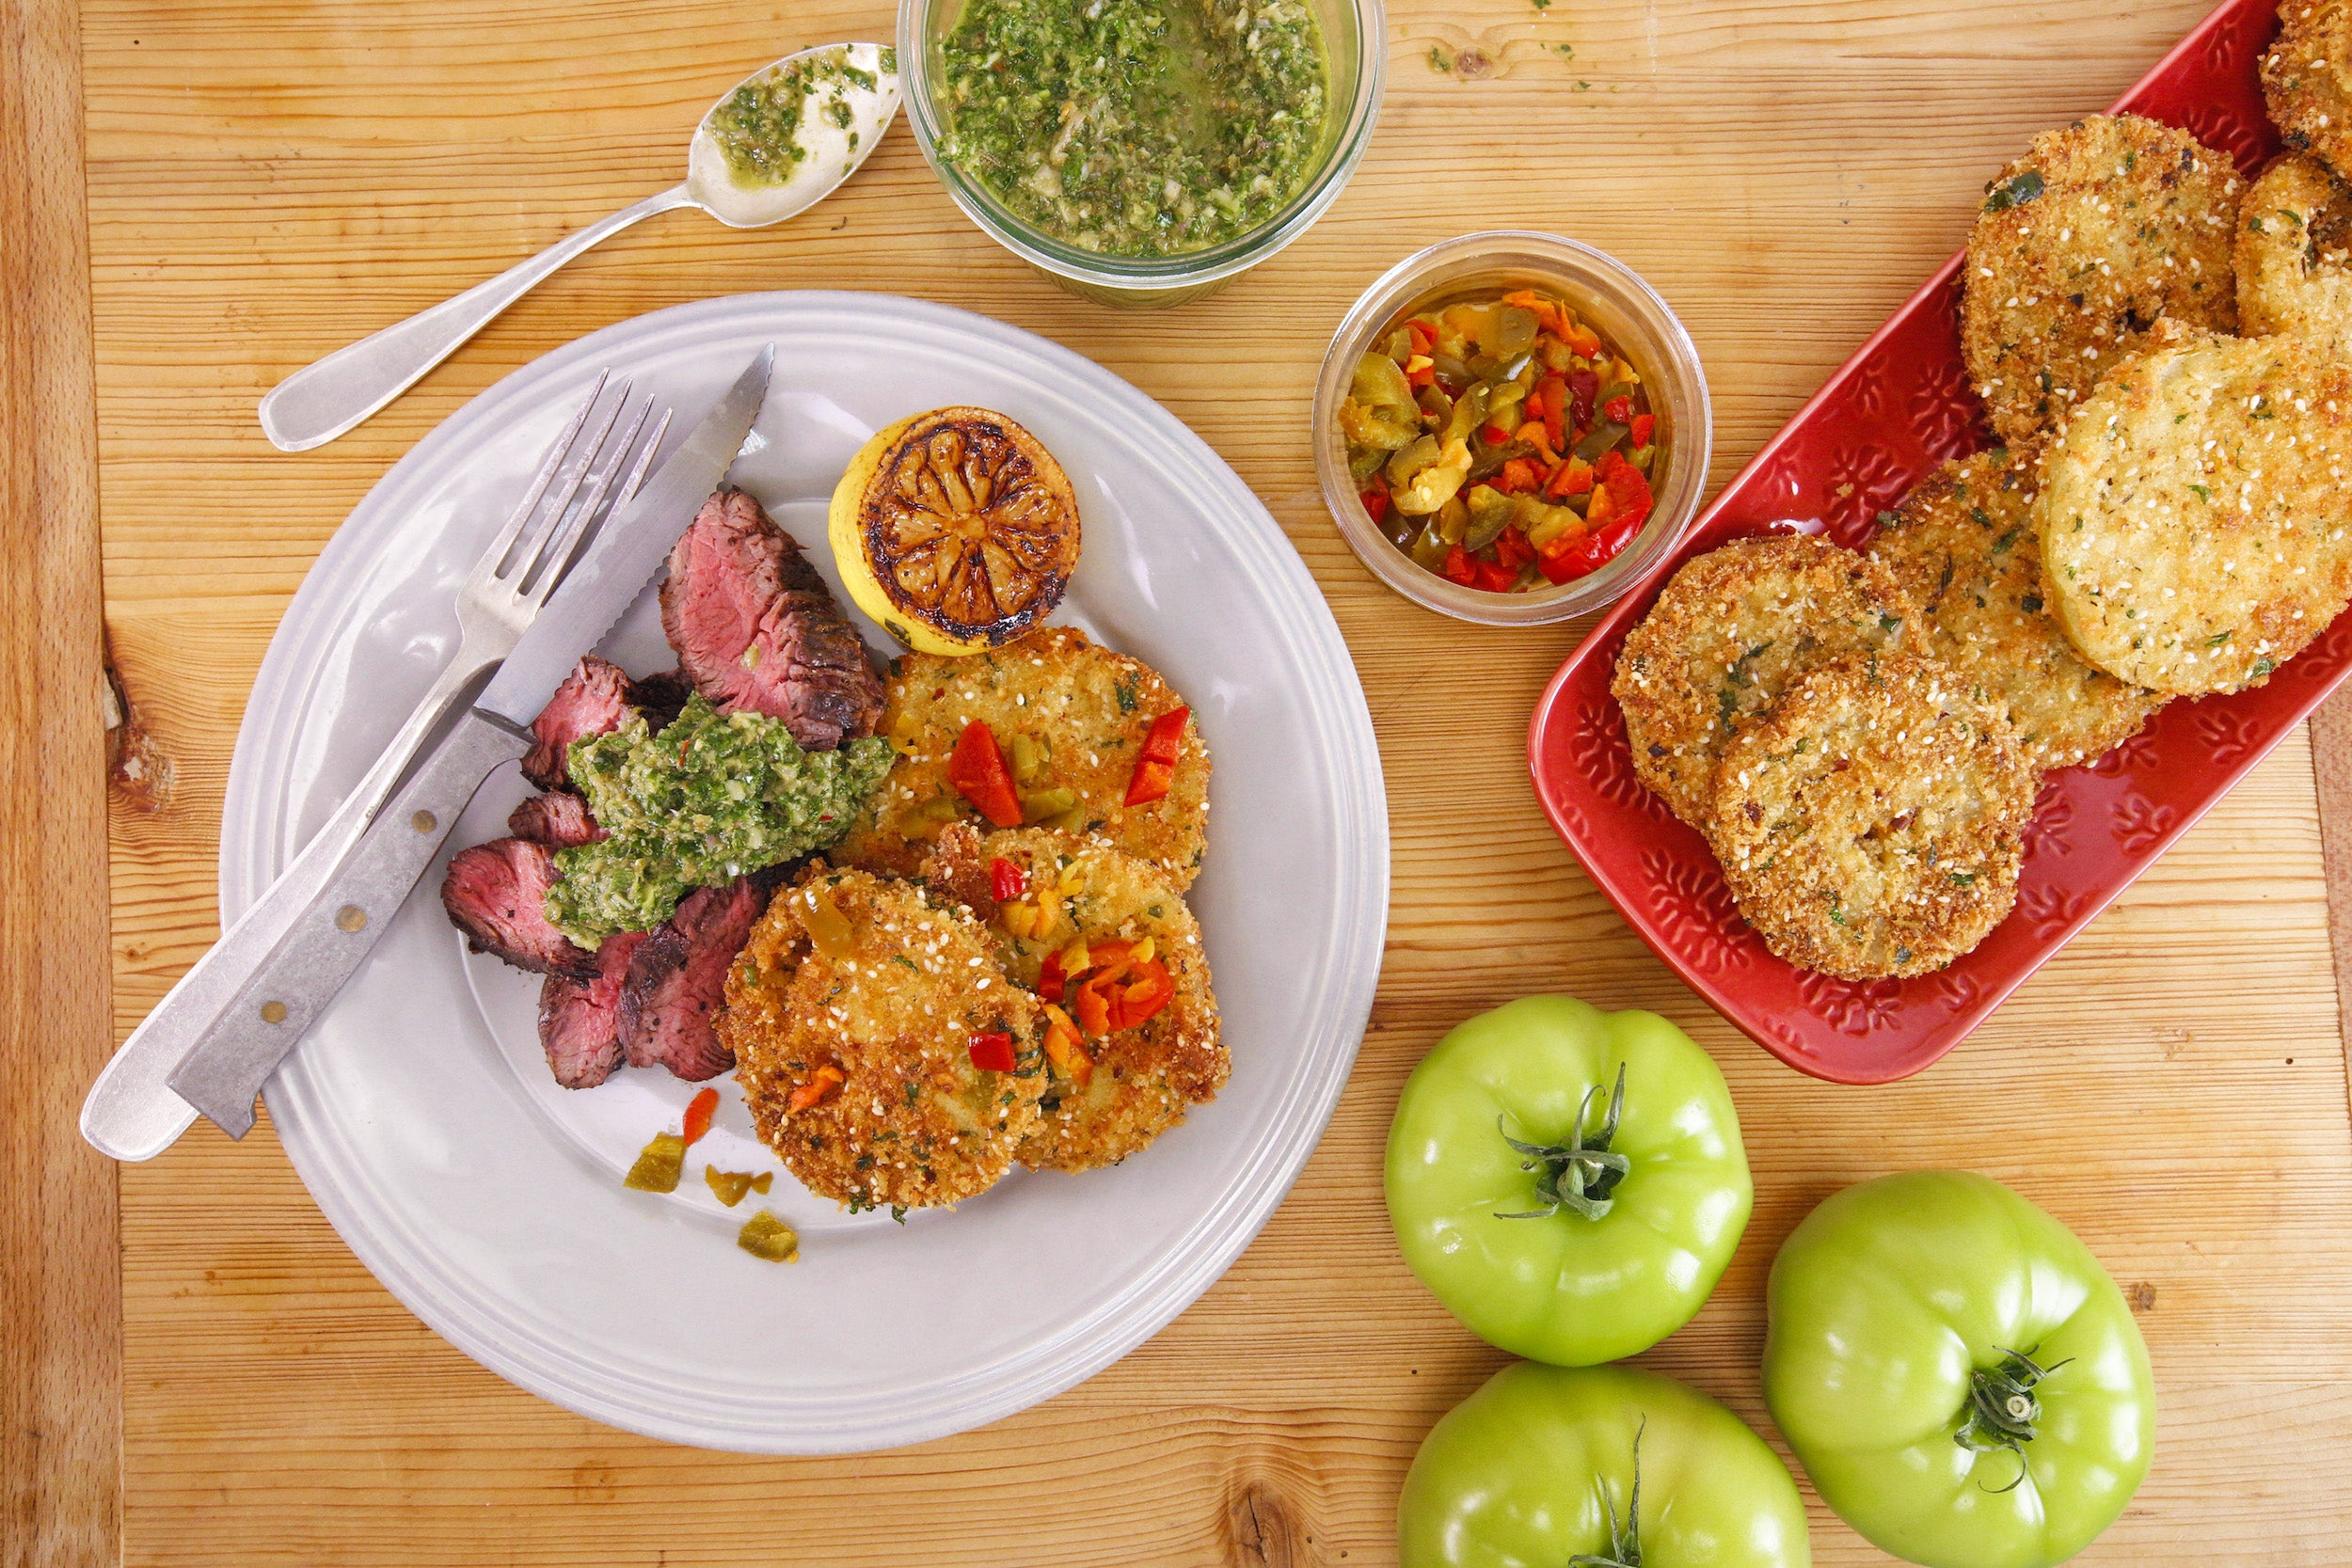 Rachael's Sliced Steak with Salsa Verde and Italian Fried Green Tomatoes